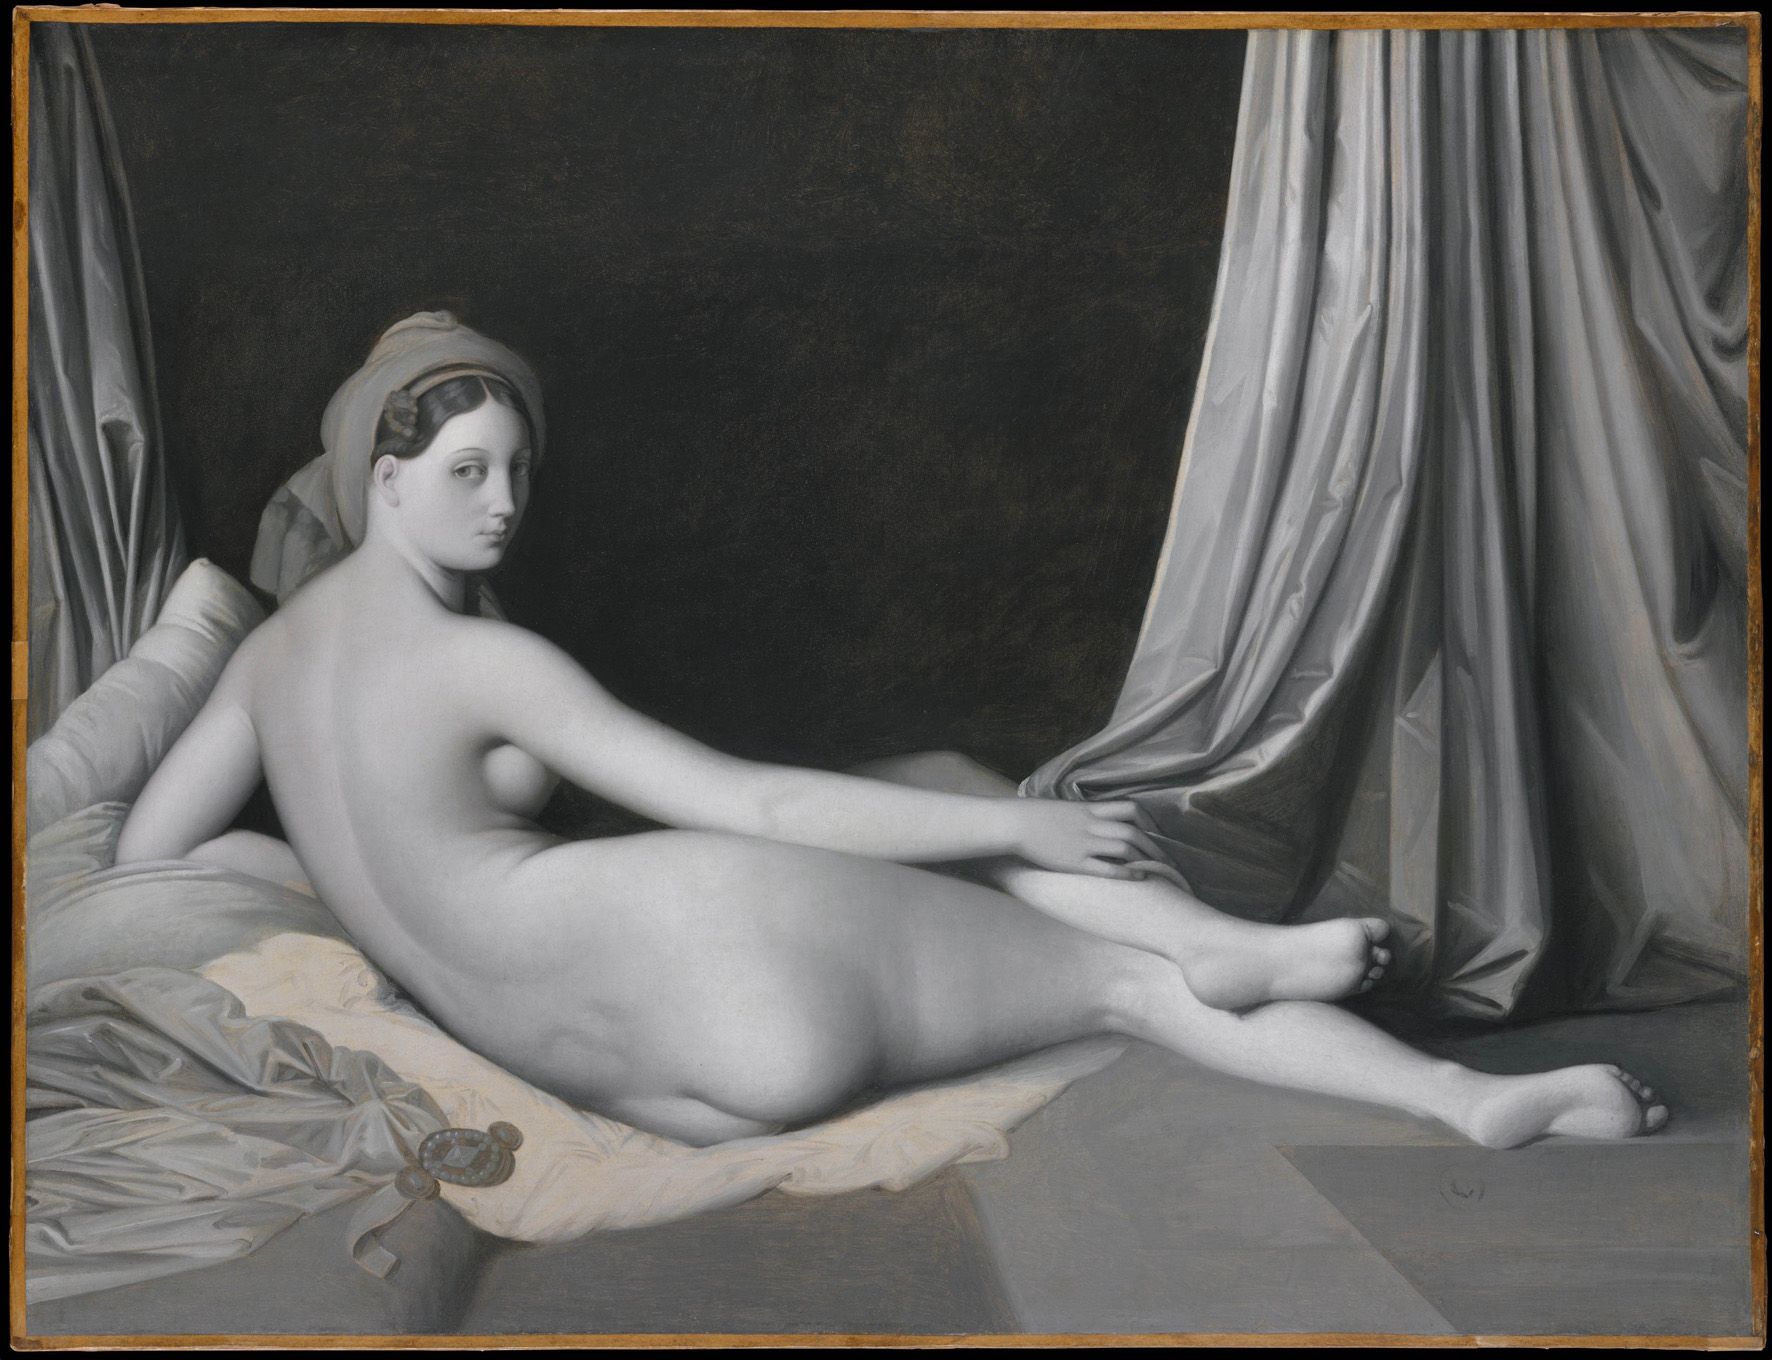 Odalisque in Grisaille Jean-Auguste-Dominique Ingres and workshop about 1824-34, © The Metropolitan Museum of Art / Art Resource